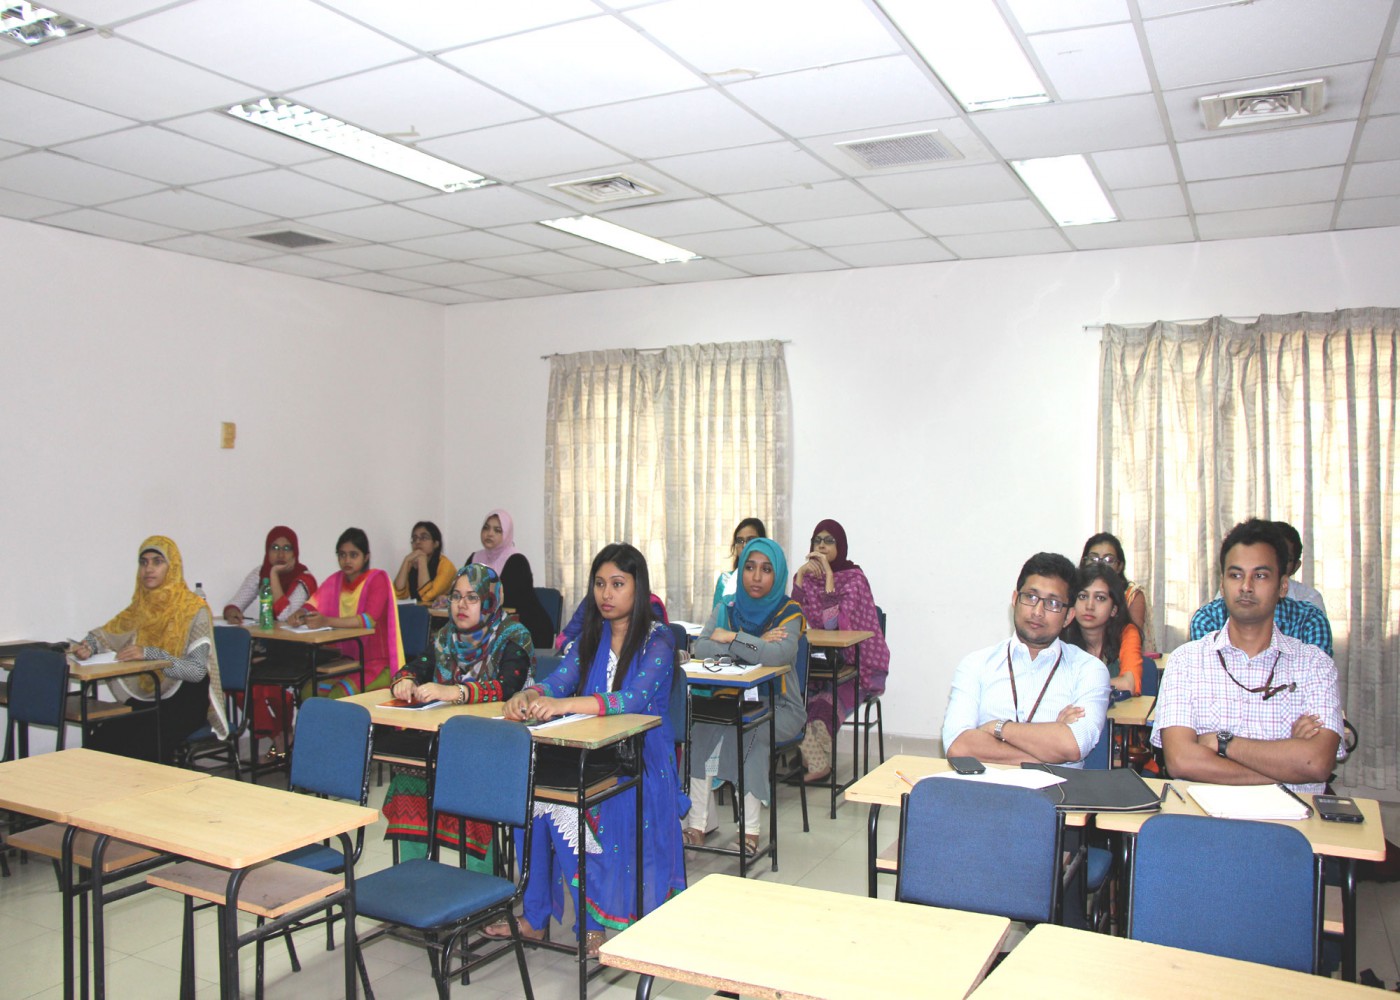 Orientation and training workshop of FT-N1 for newly recruited faculties of different departments at SUB.